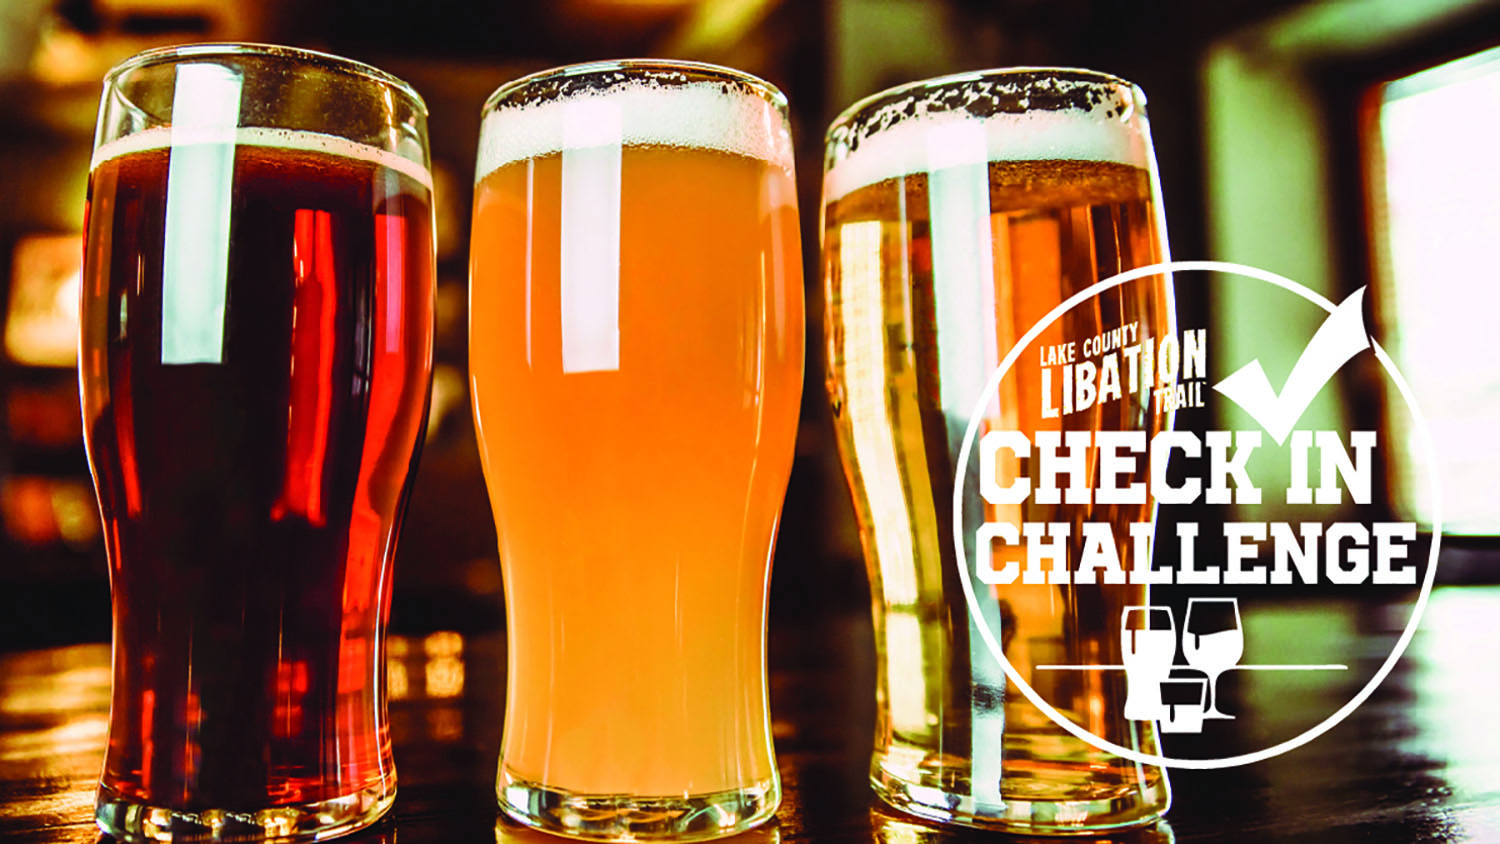 Lake County Libation Trail Month / Check-in Challenge